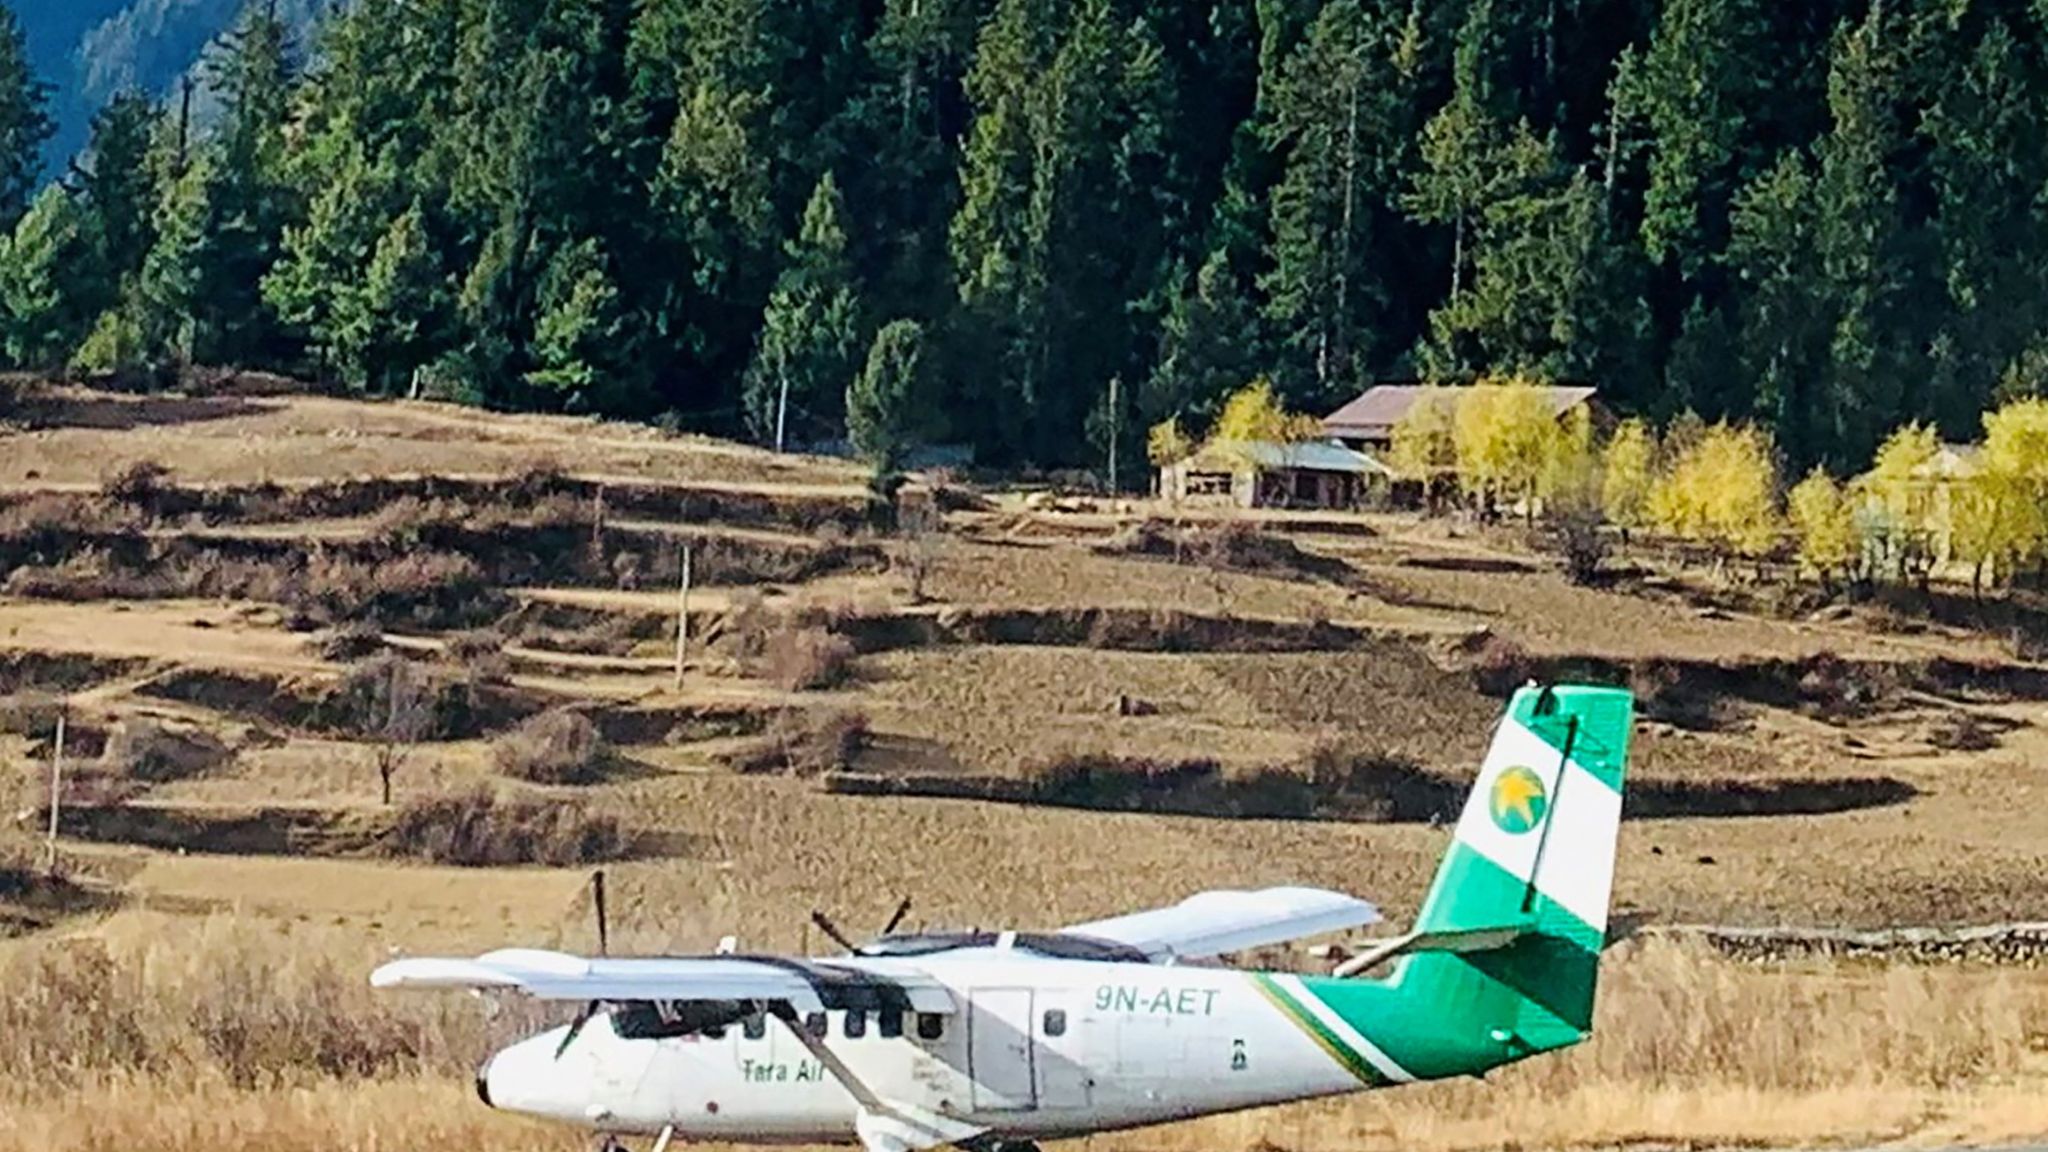 Passenger plane with 22 people on board goes missing in Nepal